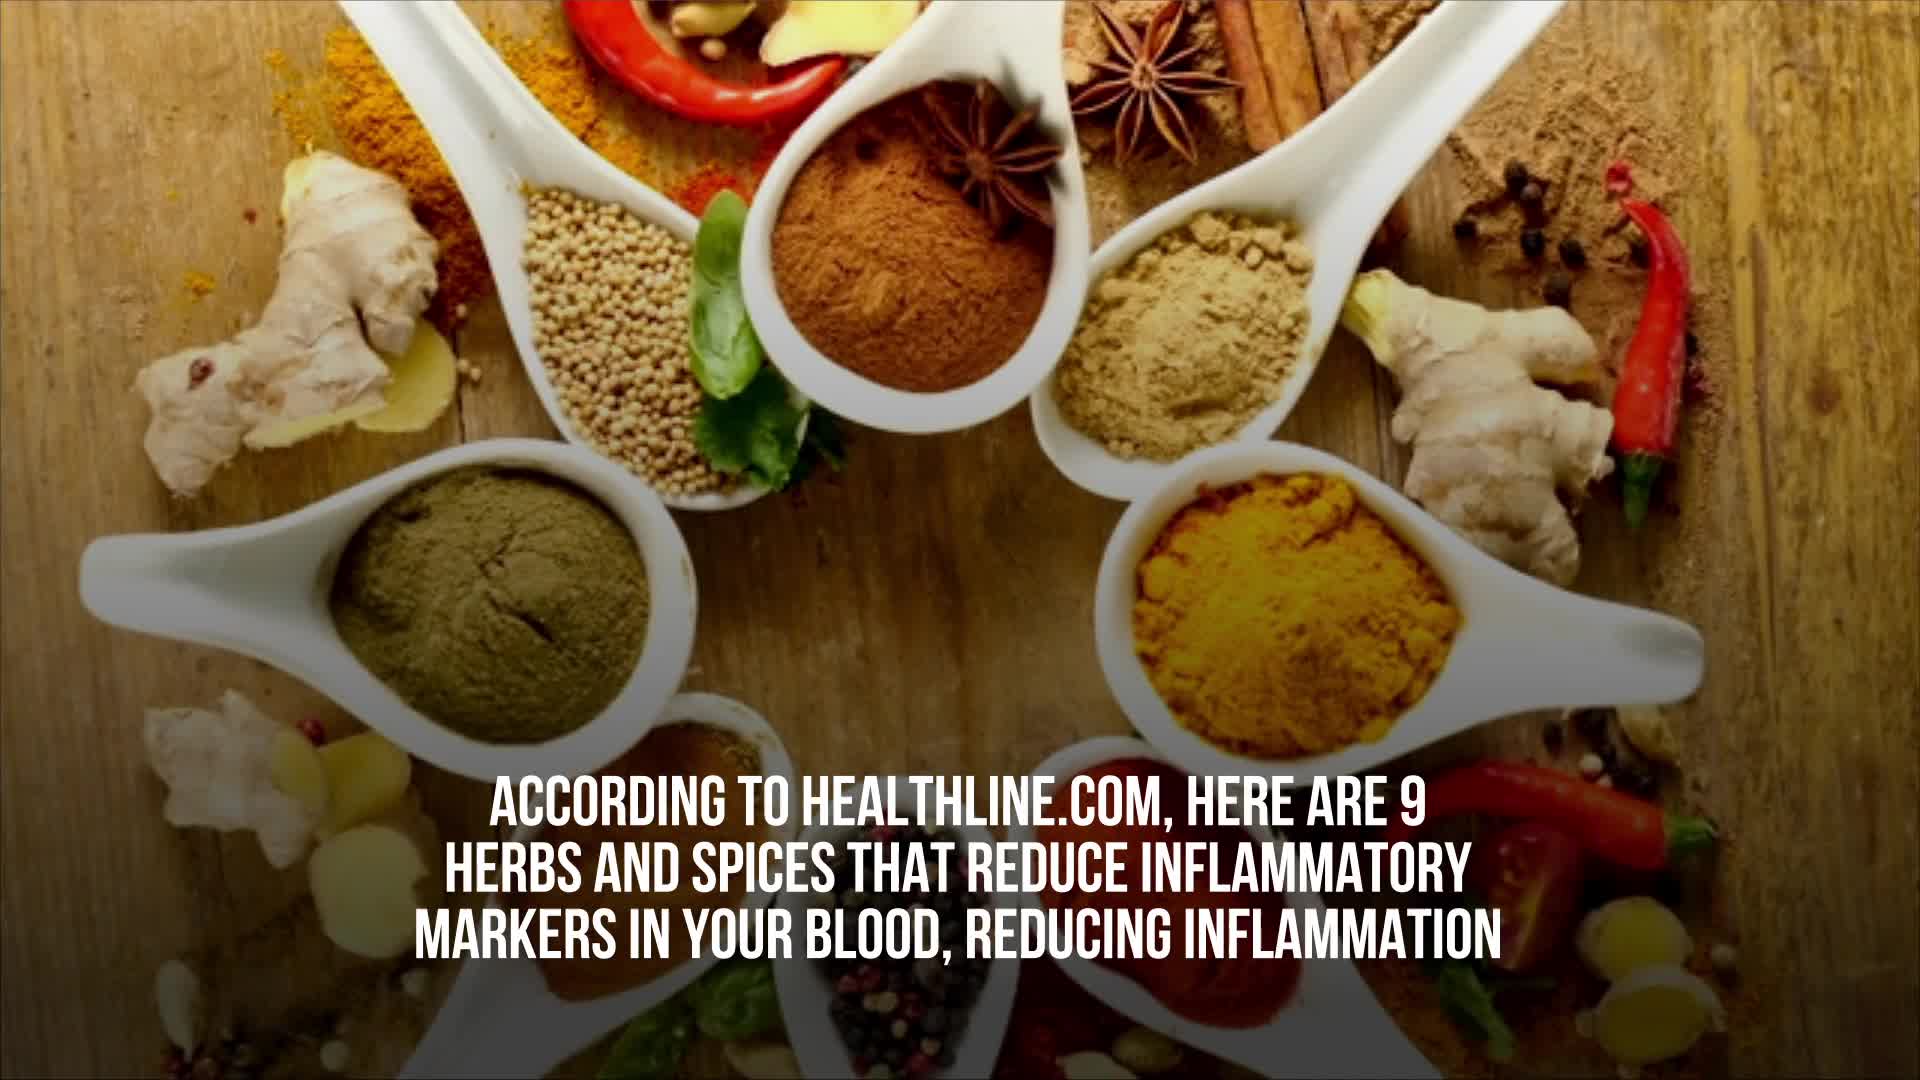 These Herbs and Spices Will Help Reduce Inflammation